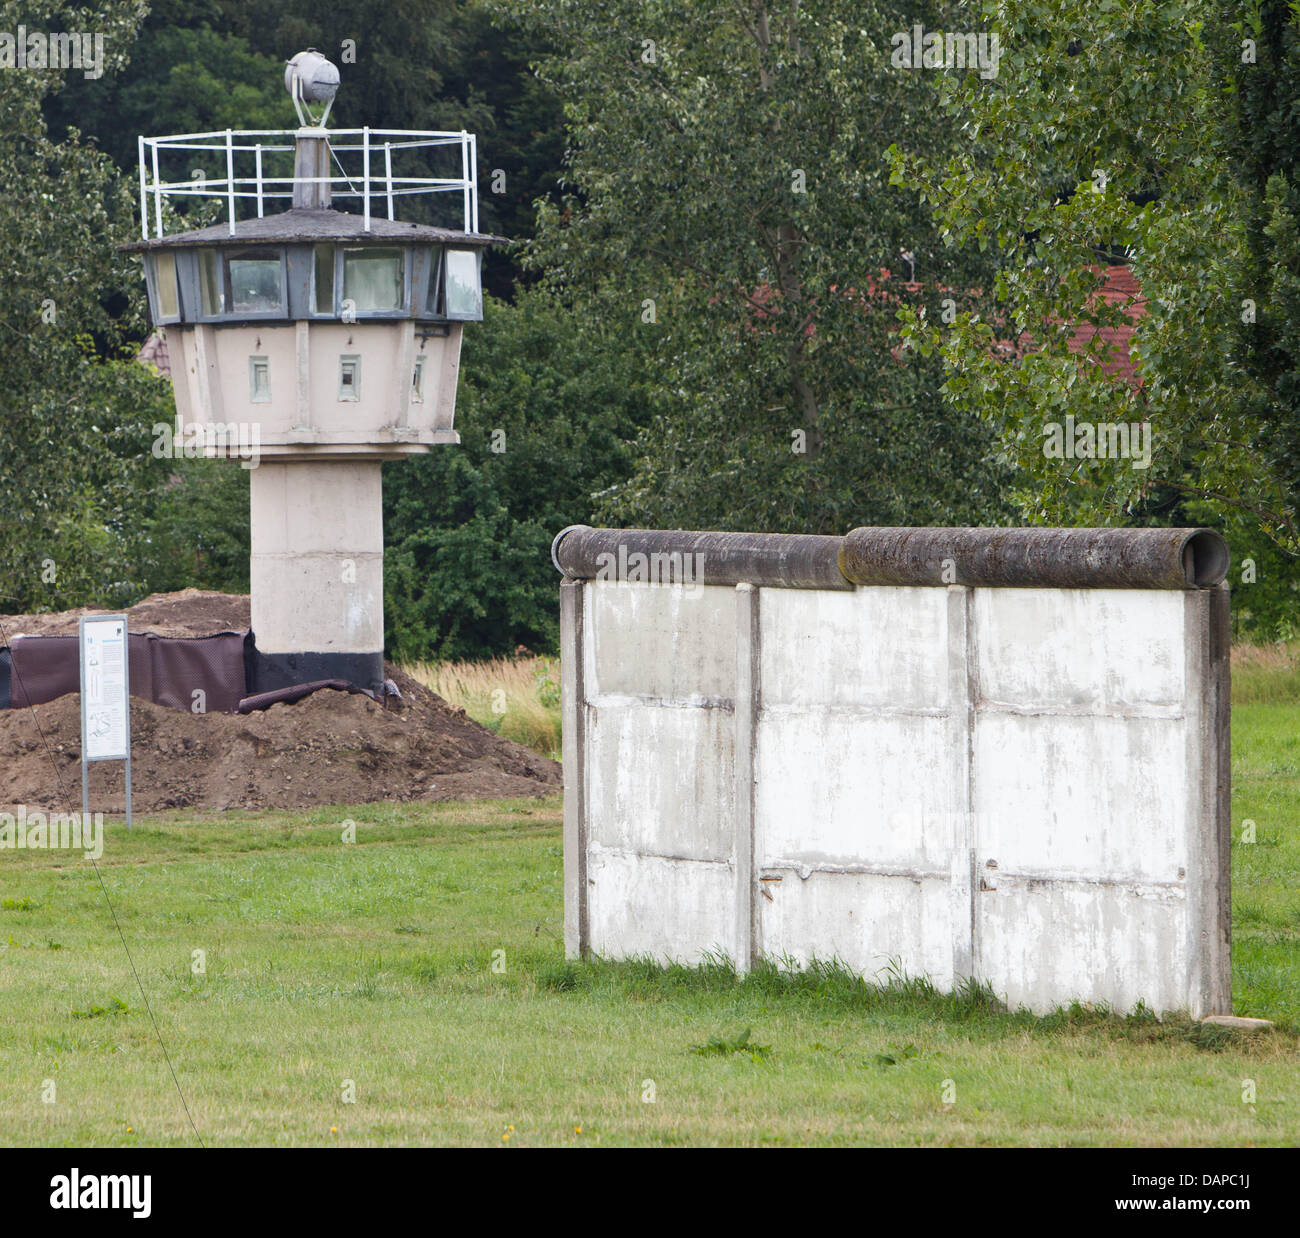 A watchtower and pieces of the Wall are visible at the memorial site Hoetensleben, situated at the former inner-German border, in Hoetensleben, Germany, 10 August 2011. The remains at the state border between Saxony-Anhalt and Lower Saxony are preserved along an area of 6.5 hectars and 350m in length. In spring 1952 the GDR government erected a five kilometre wide restricted area a Stock Photo